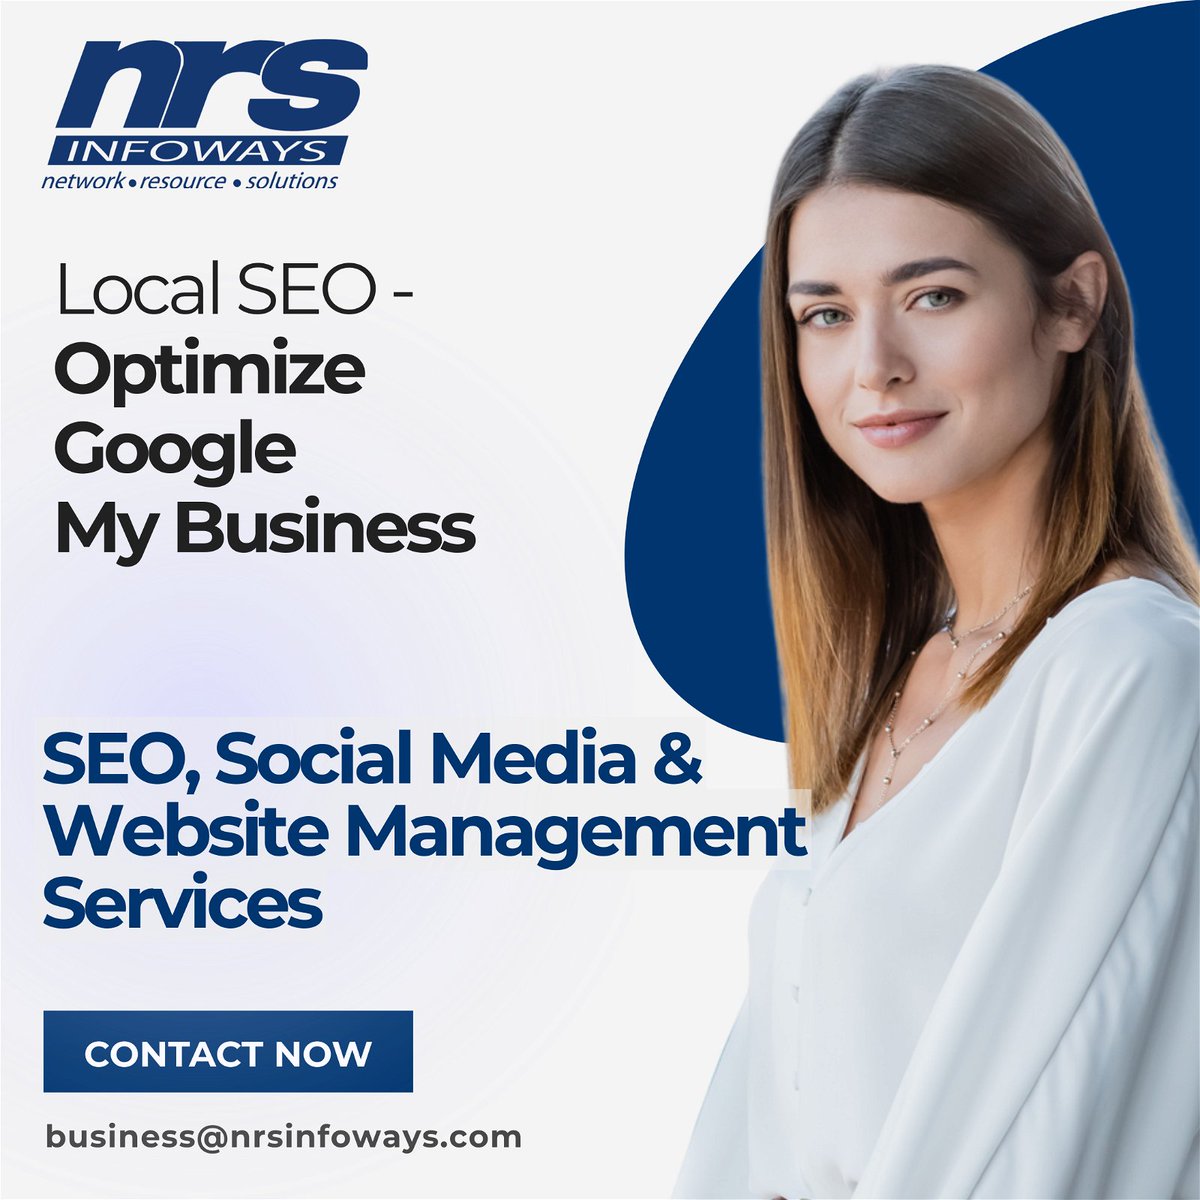 Local SEO - Optimize Google My Business

A well-optimized GMB profile enhances your visibility in local searches and on Google Maps.

We can help
Lets discuss business@nrsinfoways.com
#localseo #googlemybusiness #seostrategy #smallbusinessmarketing #nrsinfoways #seo